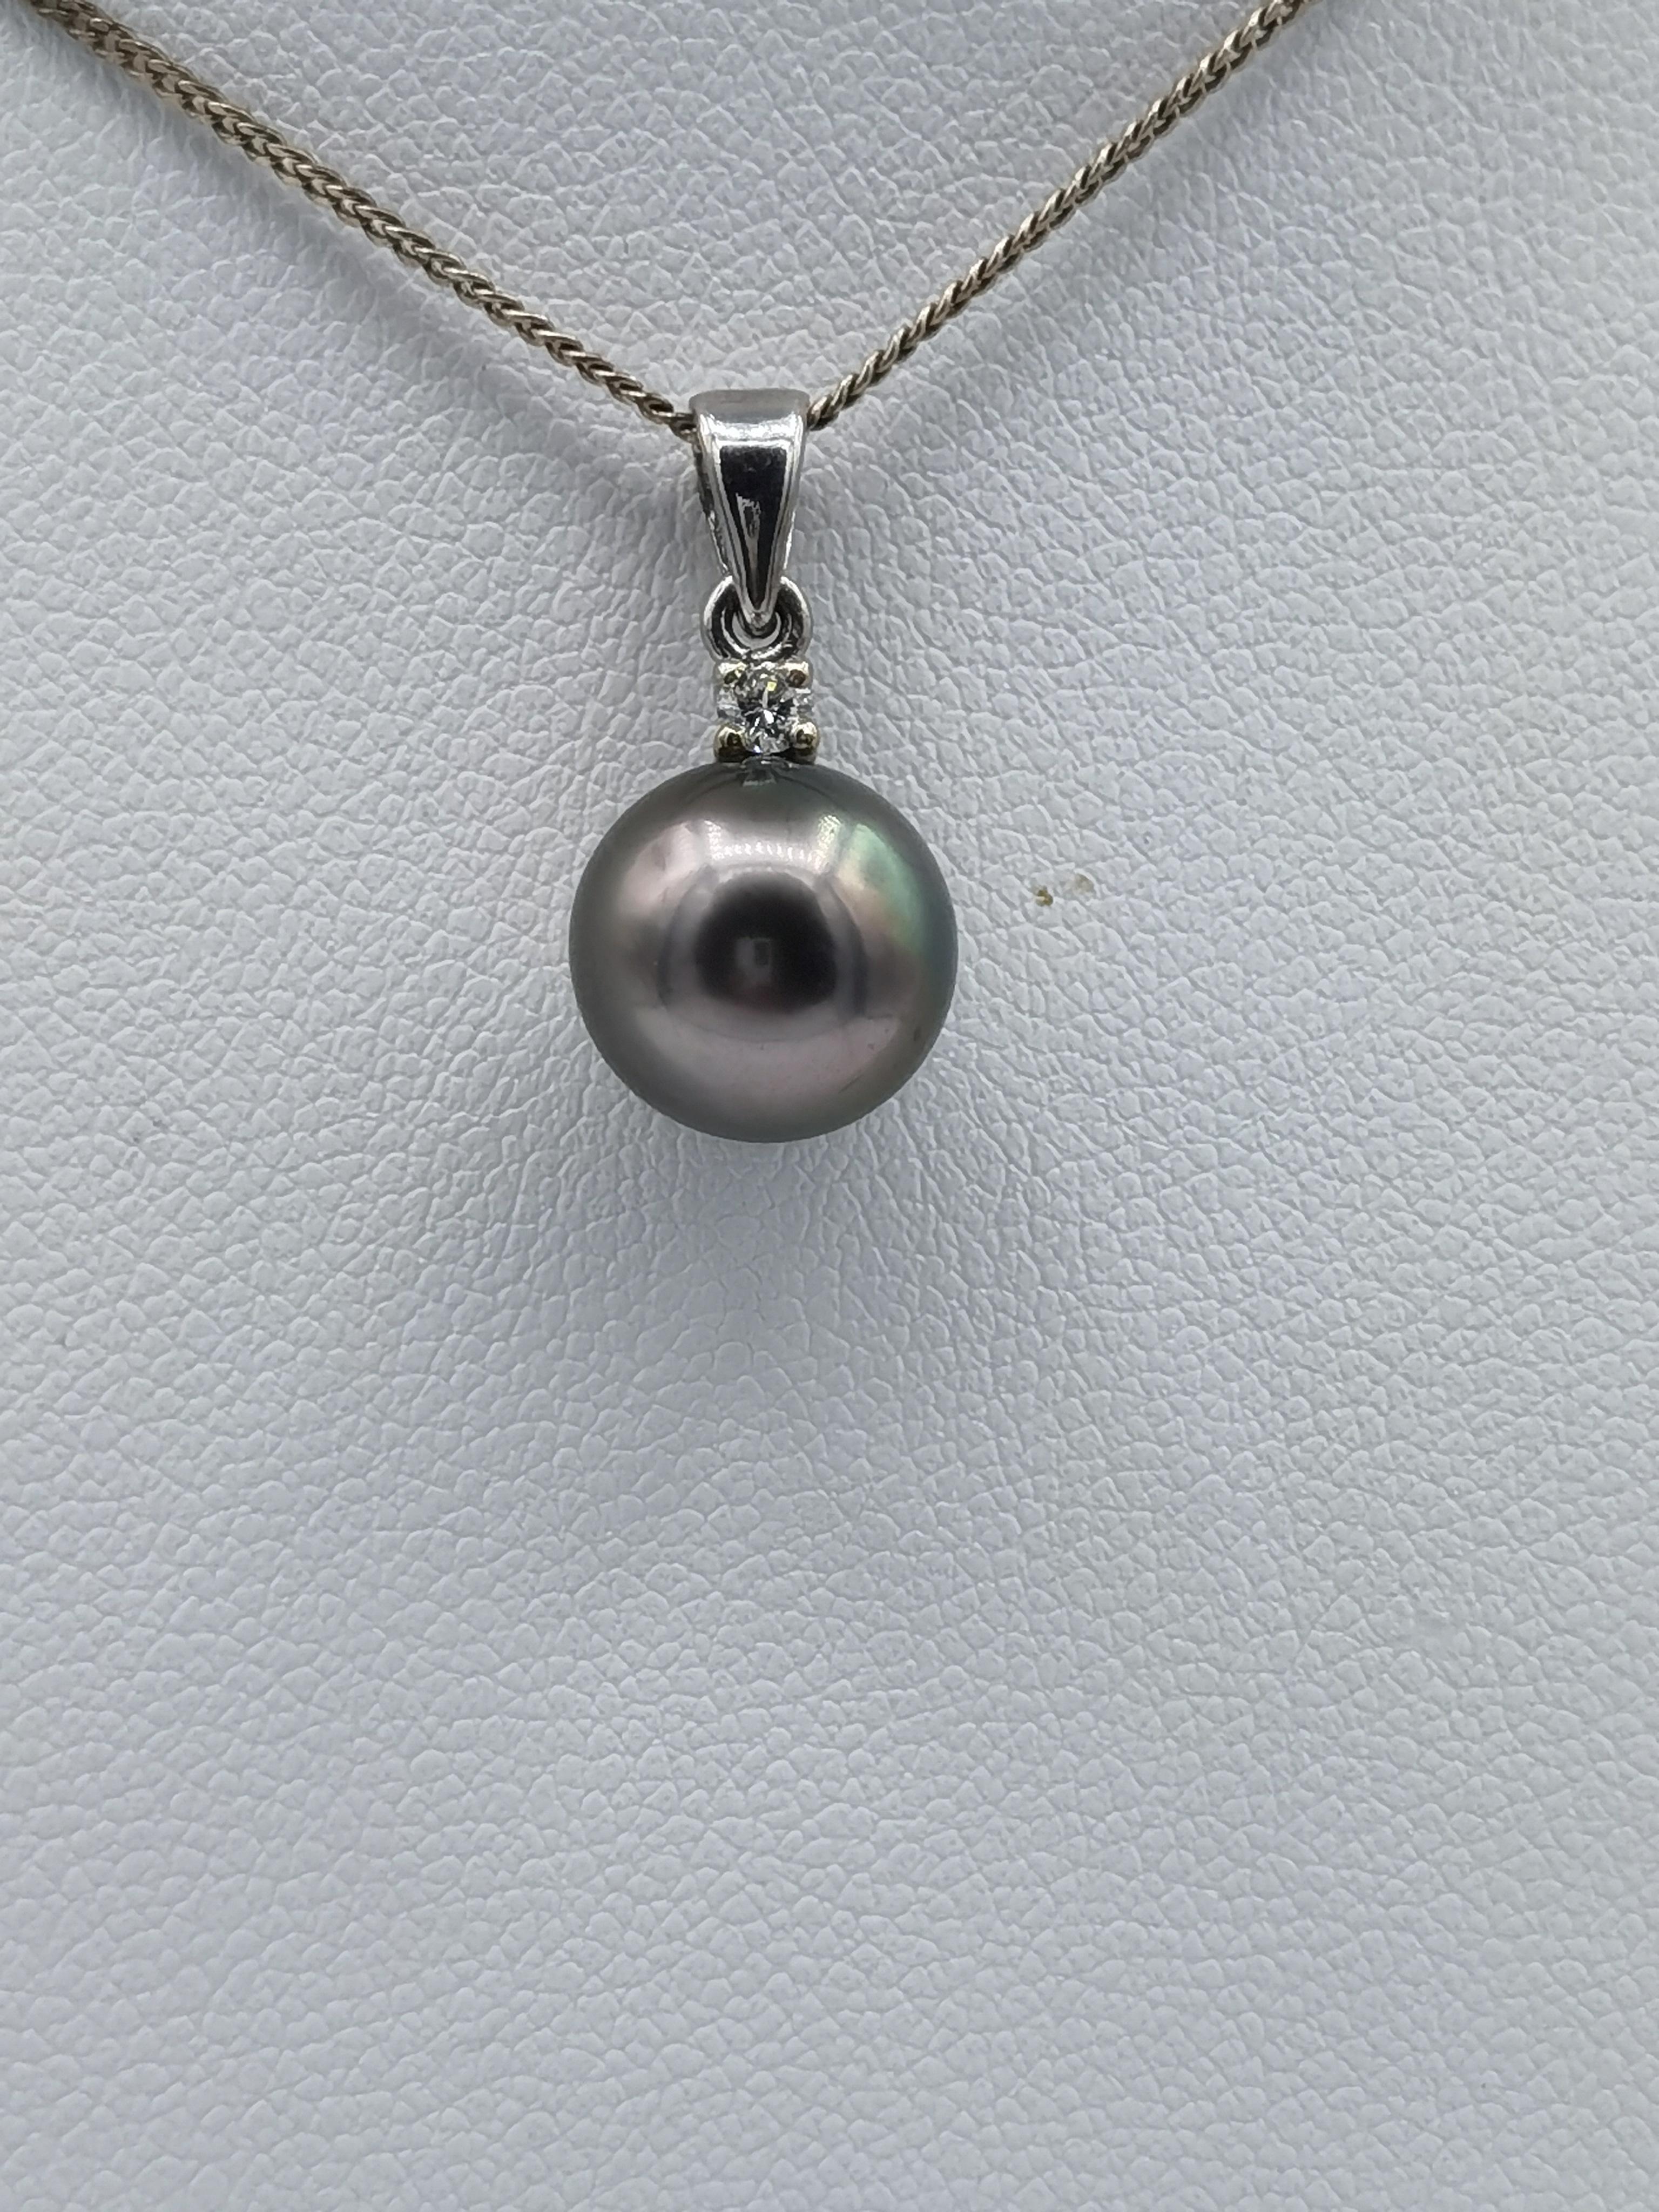 This pendant has a 8 mm round Tahitian gray pearl on top 
1 diamond 0,05 ct all set in 18 k white gold
weight is 2 gram
long 18 mm